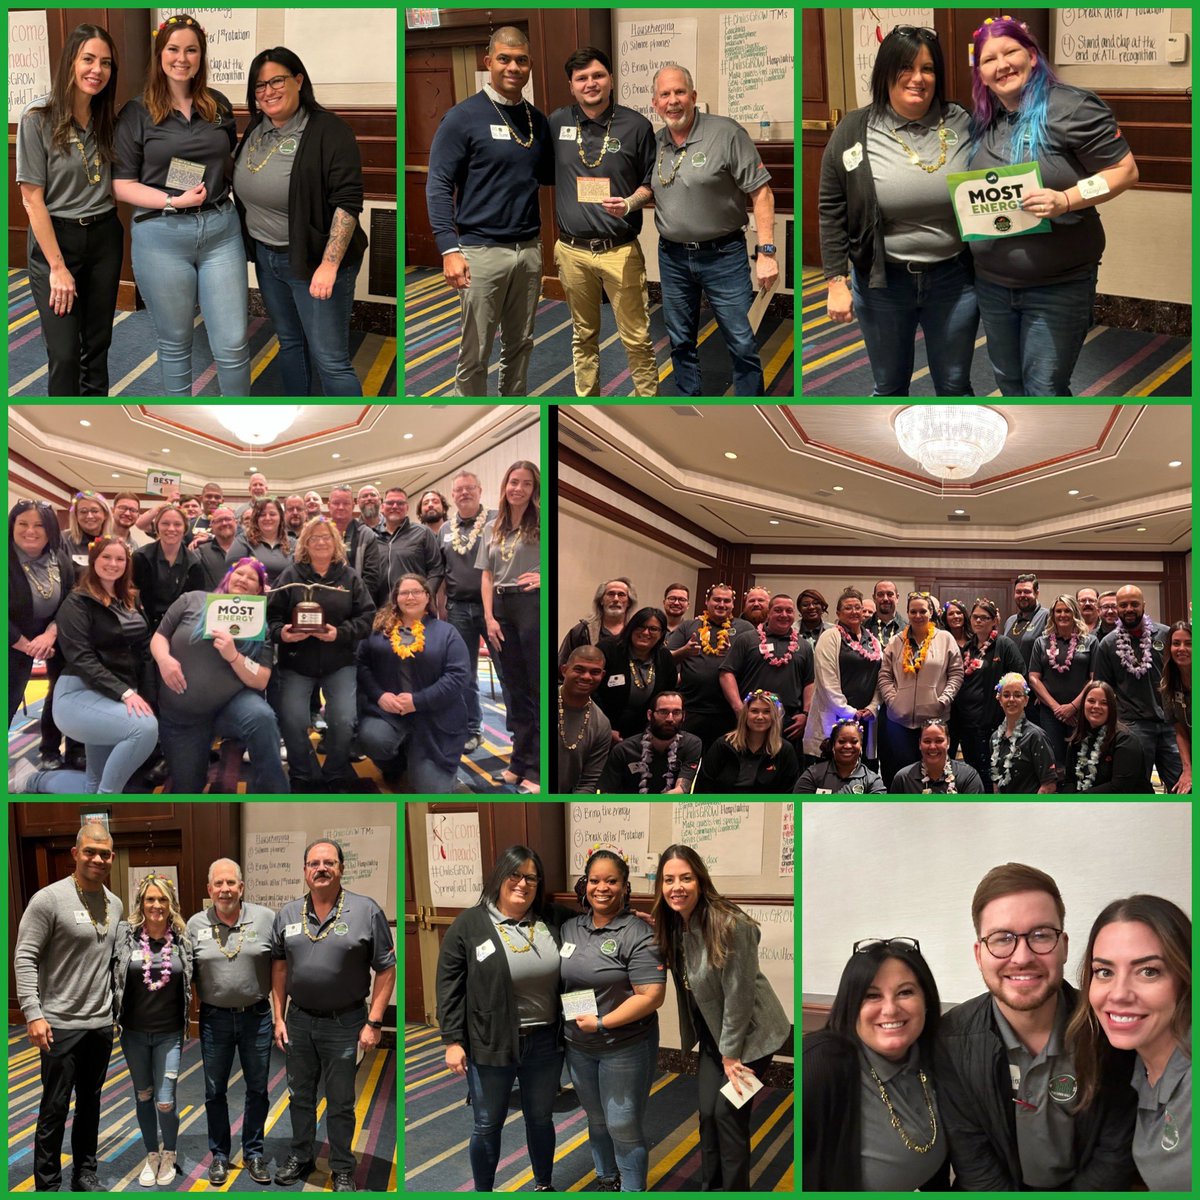 Central Plains and Midwest F’24 #ChilisGrow Townhall!! Such an awesome experience spending time with these leaders on their career wellbeing! 🌶️🫶🌱#MakingGAINSinCentralPlains #MidwestistheBEST